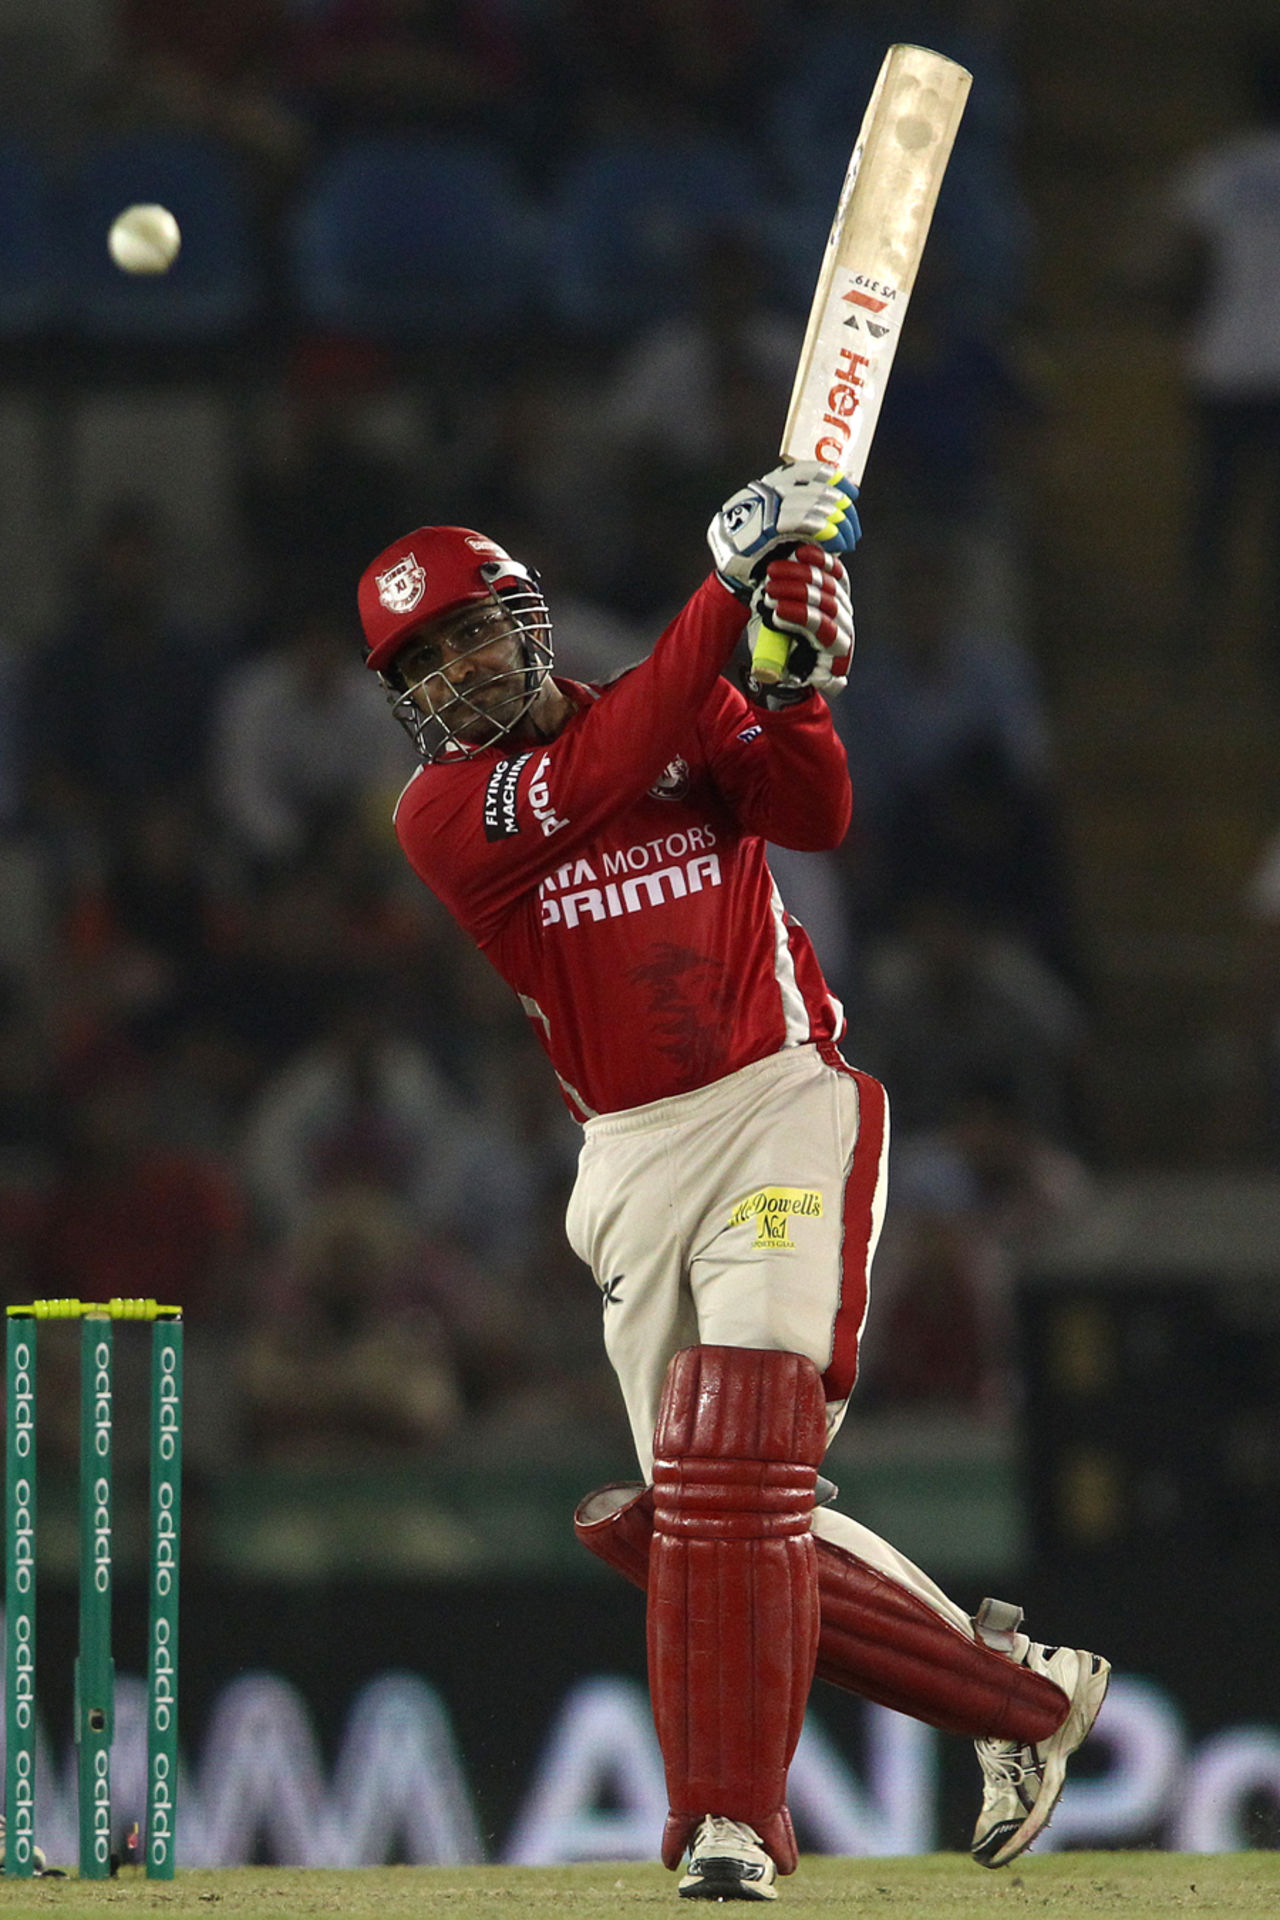 Virender Sehwag laid a platform with 52 off 37, Kings XI Punjab v Northern Knights, Champions League T20, Mohali, September 26, 2014